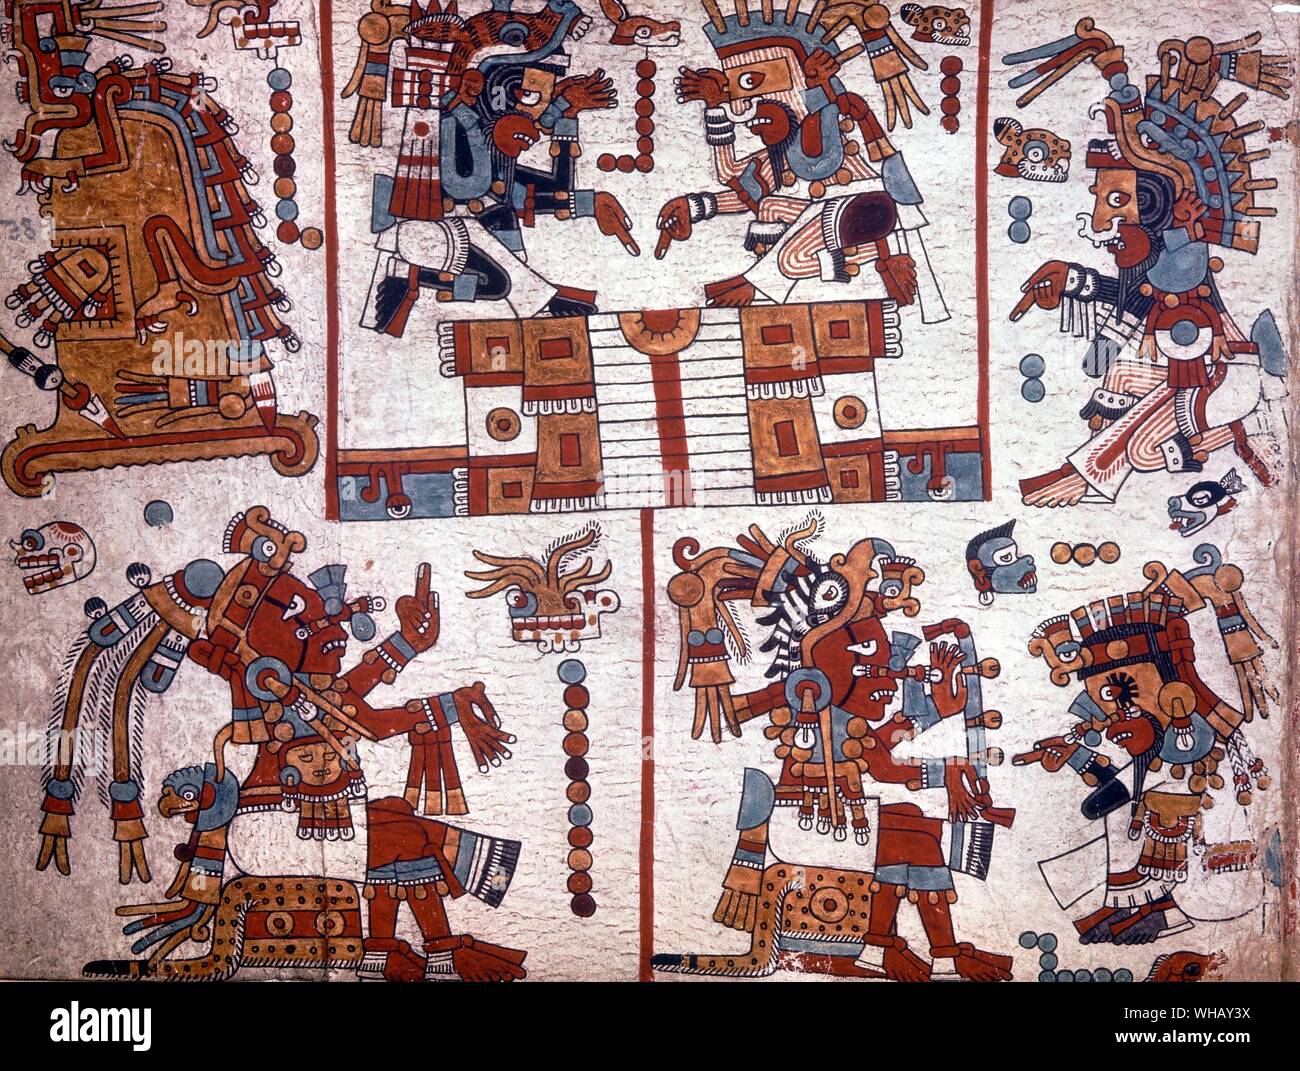 A Mixtec Codex page from the Codex Zouche Nuttall. The Conquistadors by Hammond Innes, page 120. Stock Photo